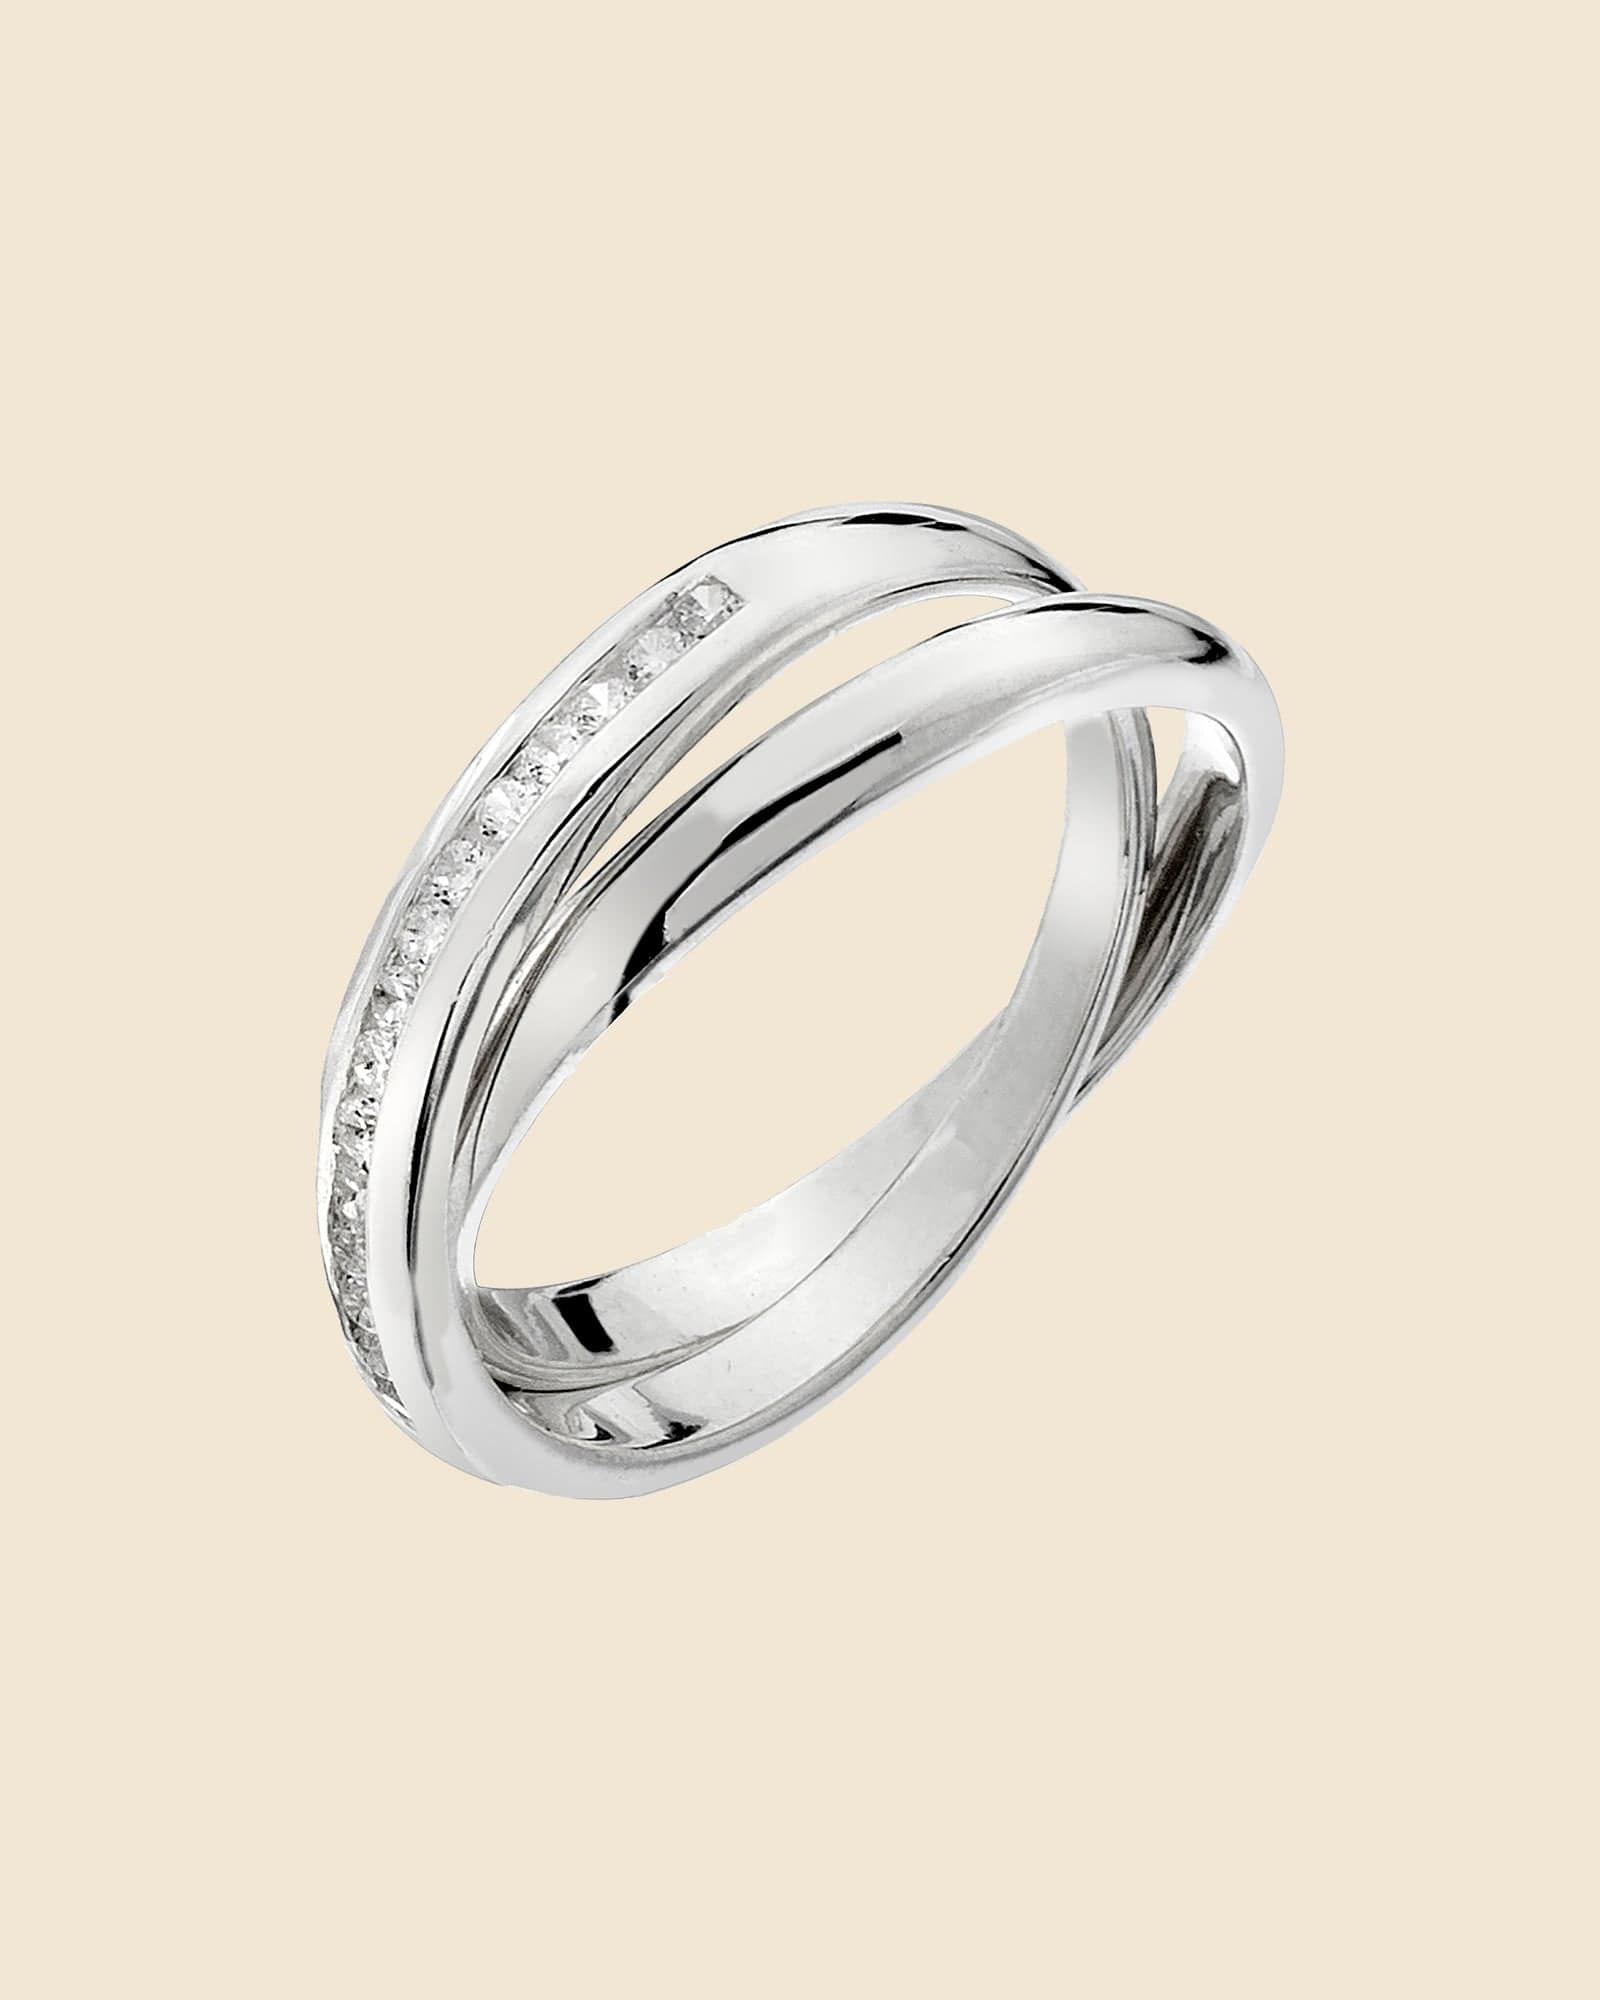 Sterling Silver and Cubic Zirconia Russian Wedding Band